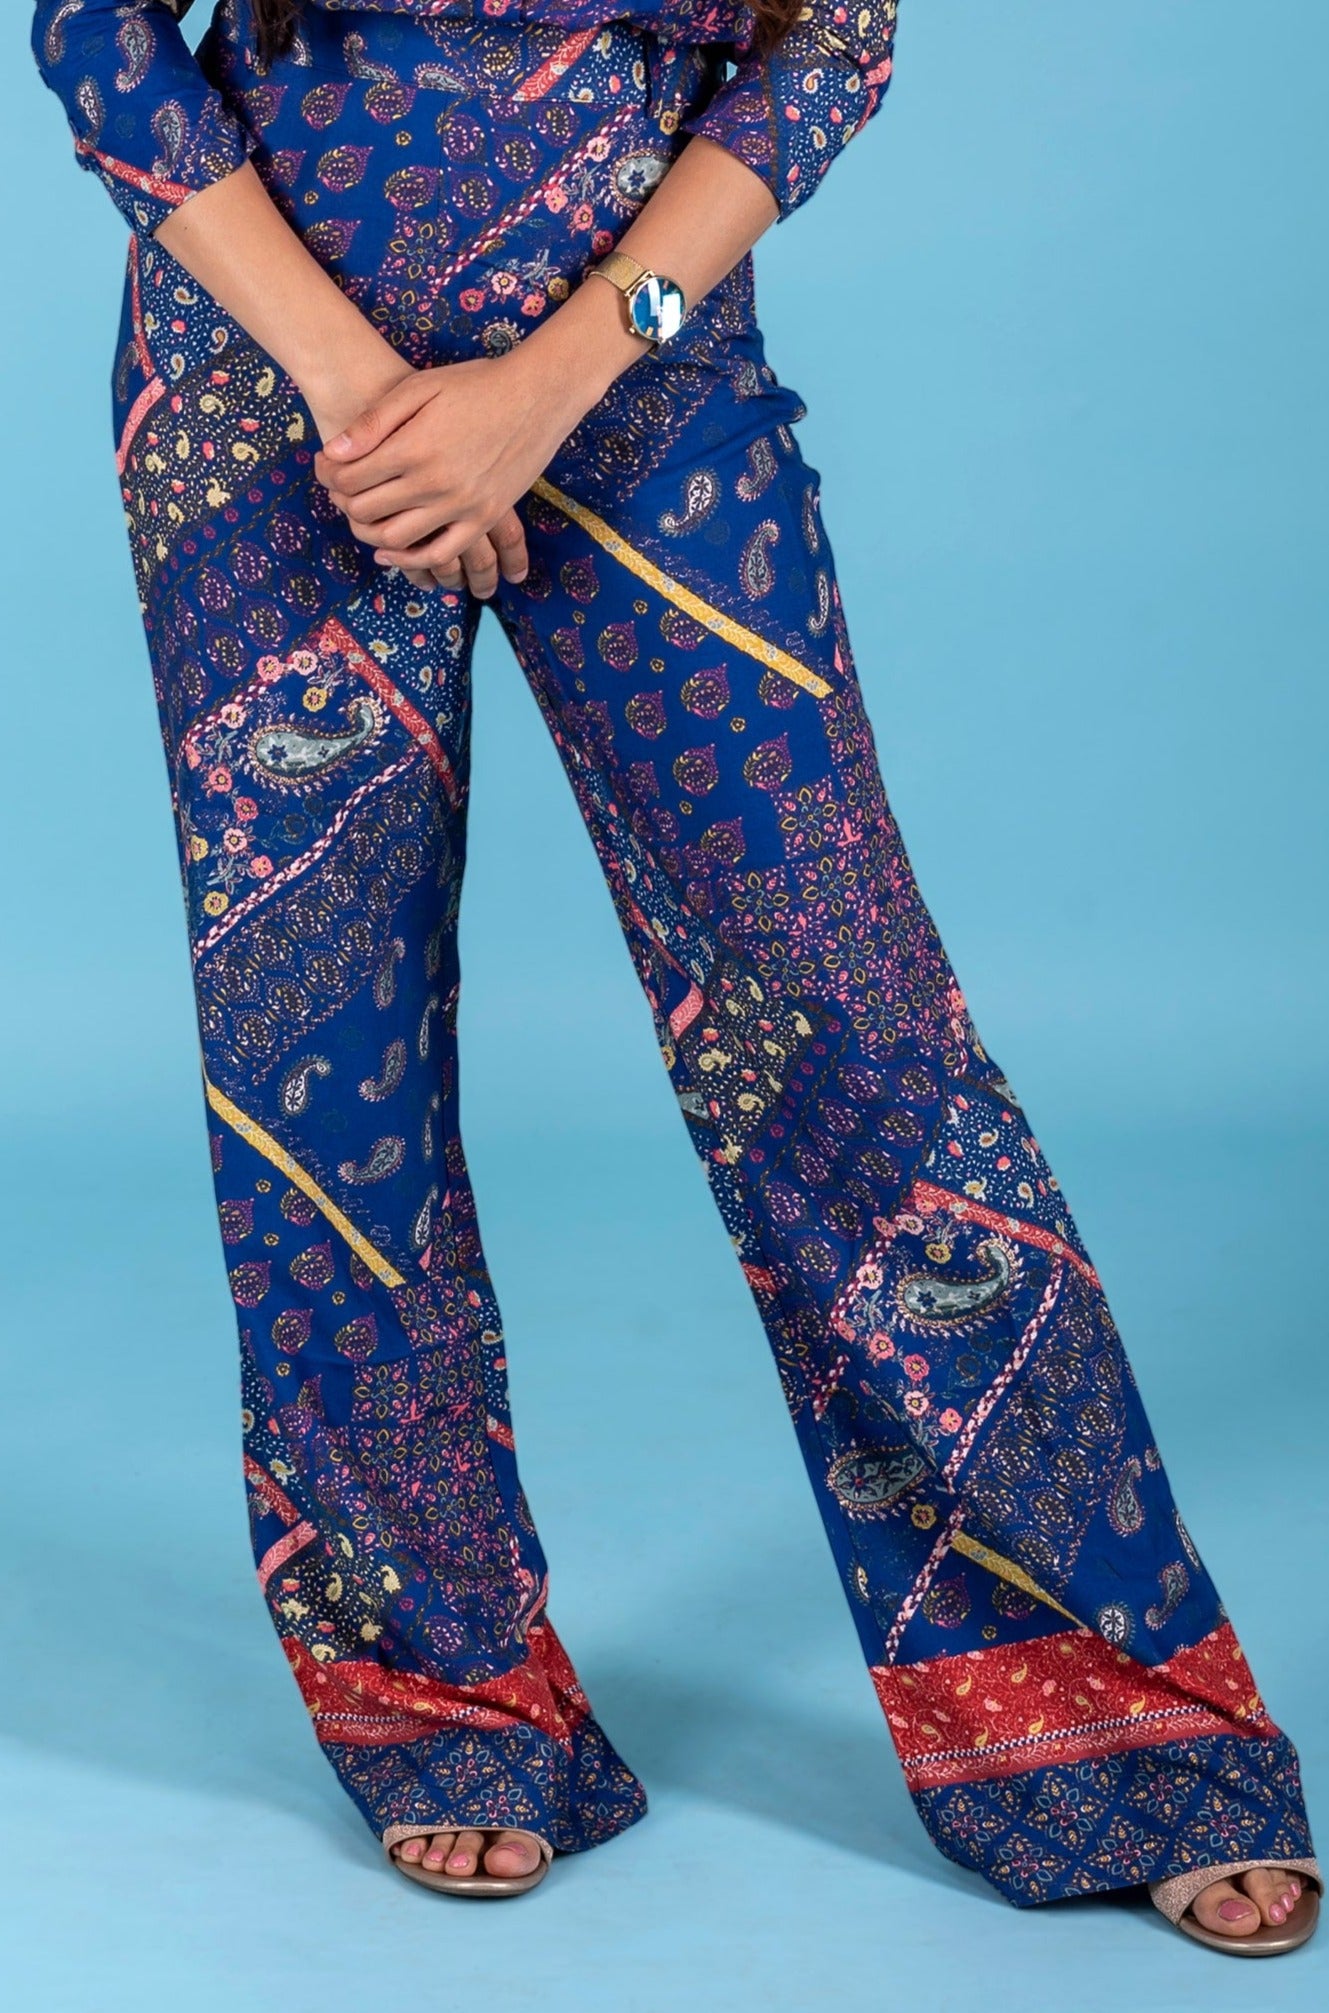 Spring Trend to Try: Colored & Printed Pants - 50 IS NOT OLD - A Fashion  And Beauty Blog For Women Over 50